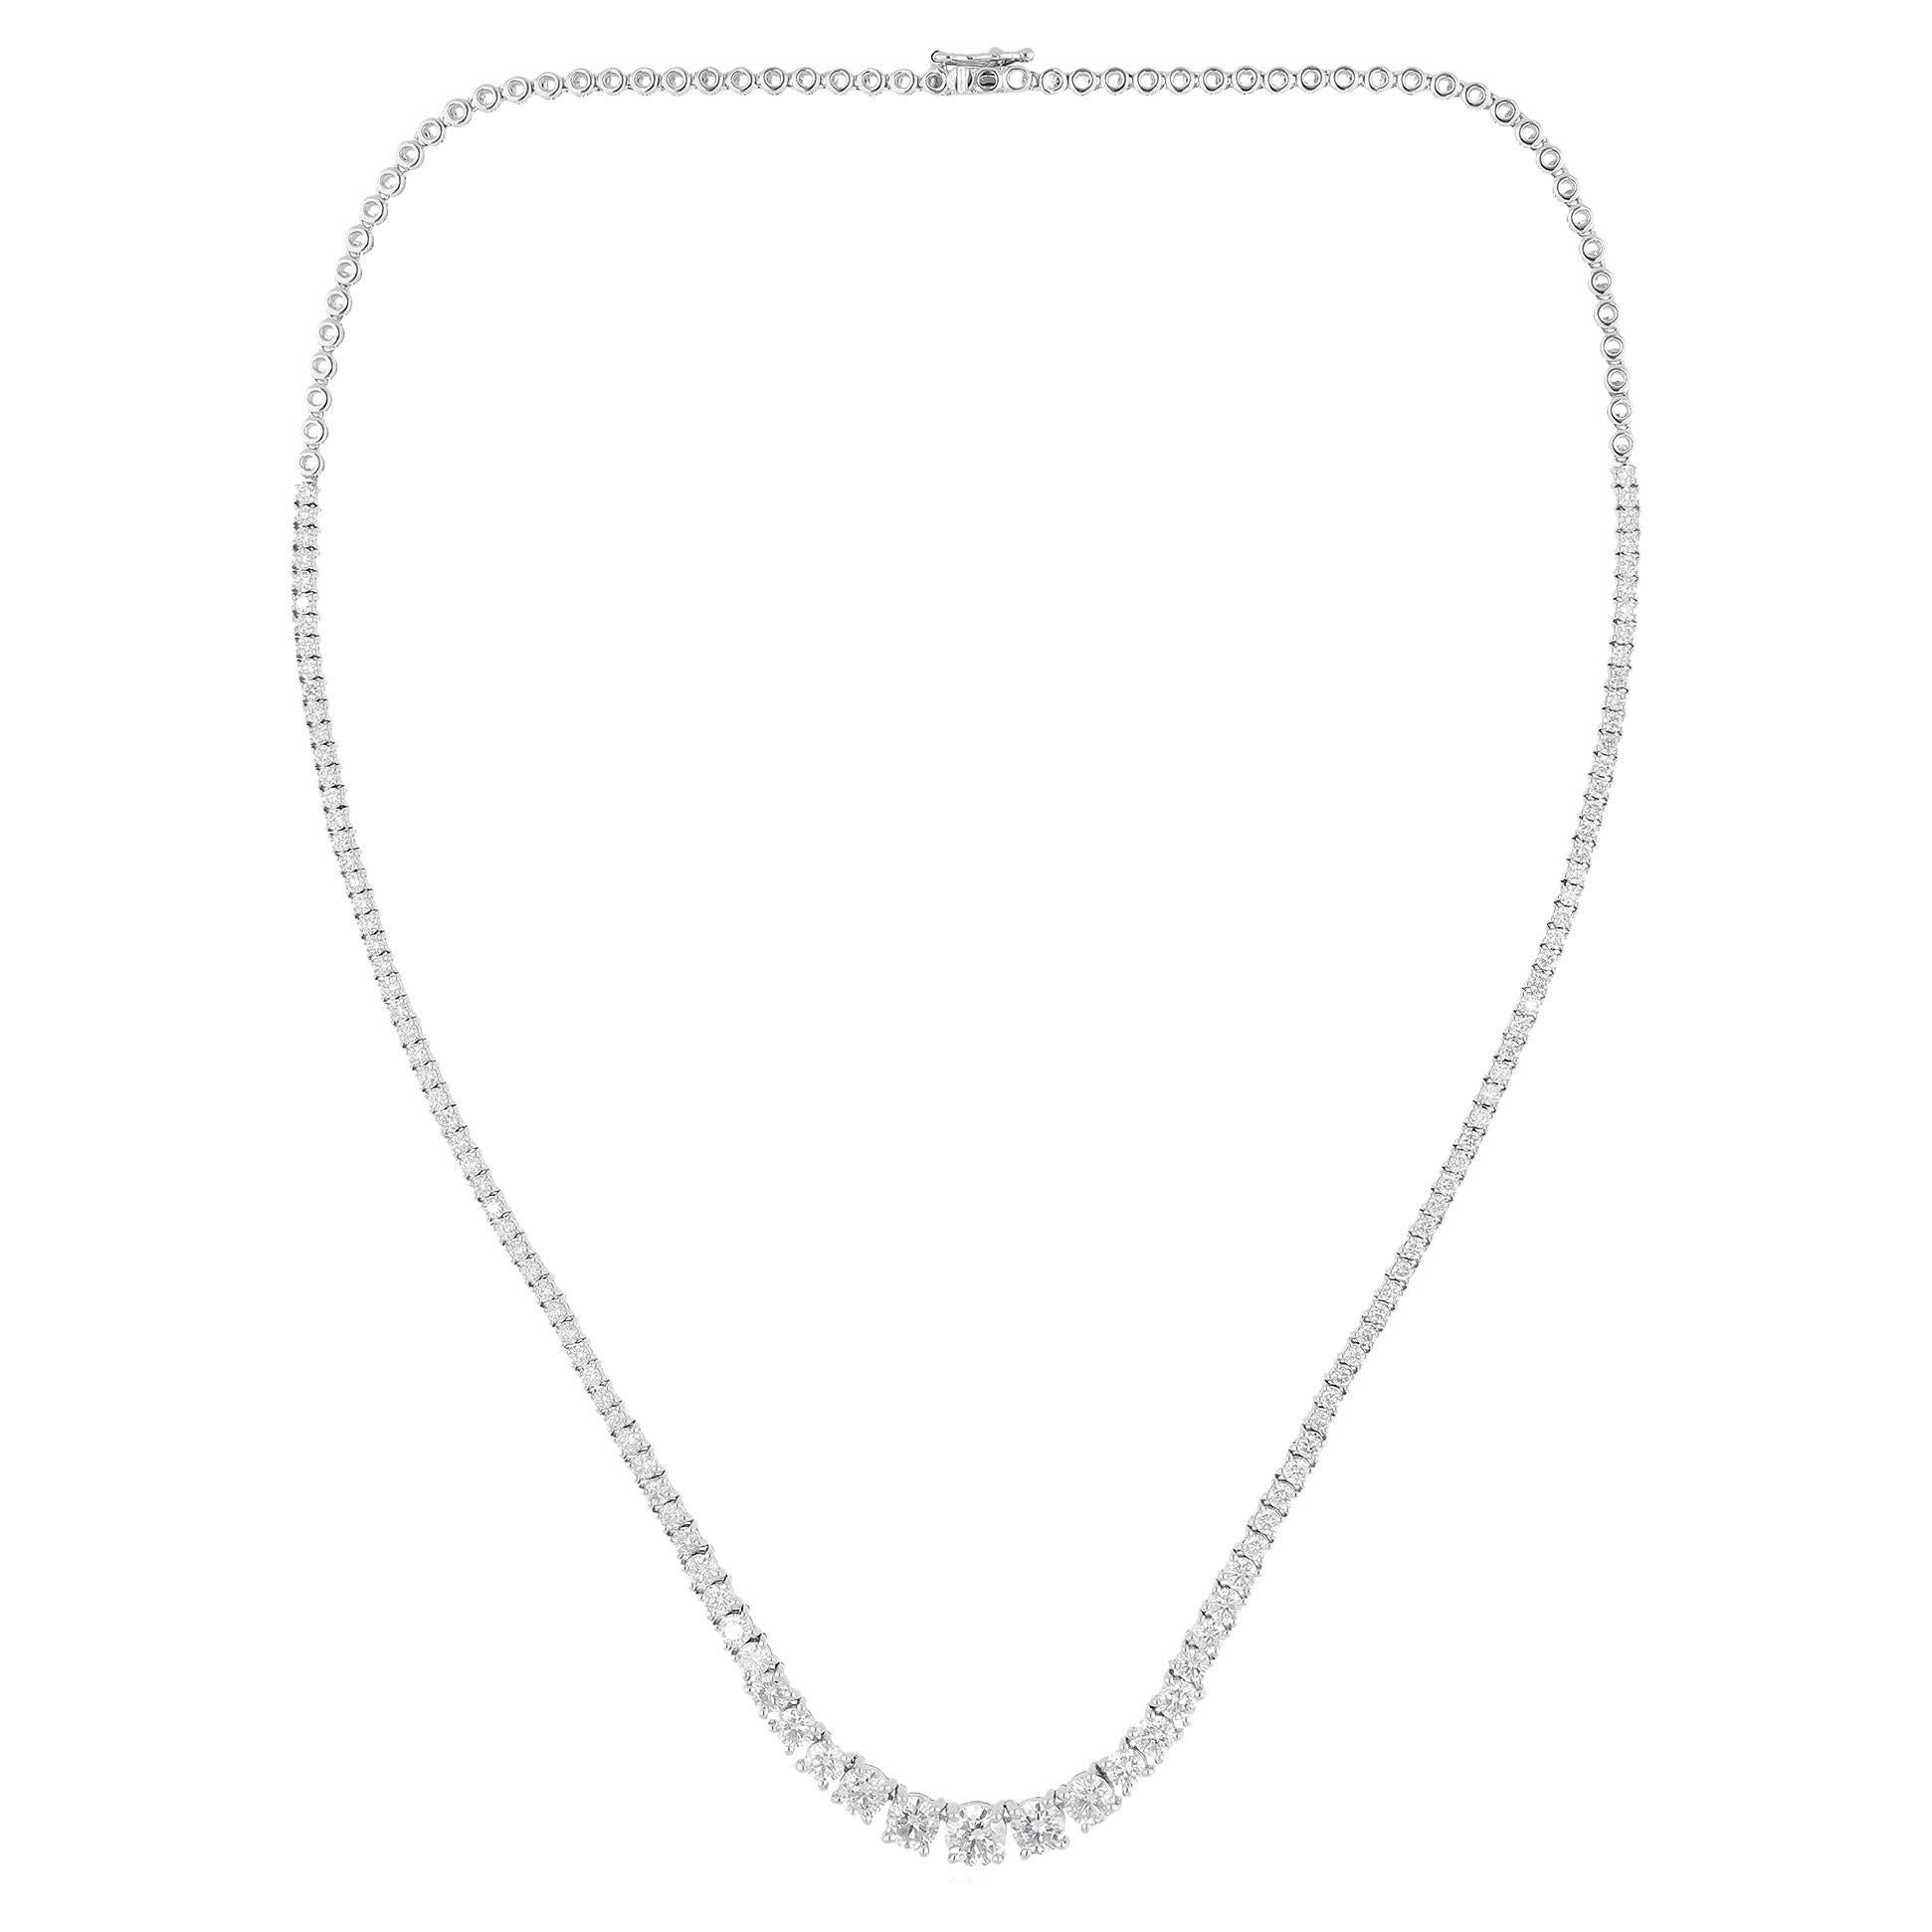 Natural 5.23 Carat Diamond Necklace 18 Karat White Solid Gold Handmade Jewelry For Sale